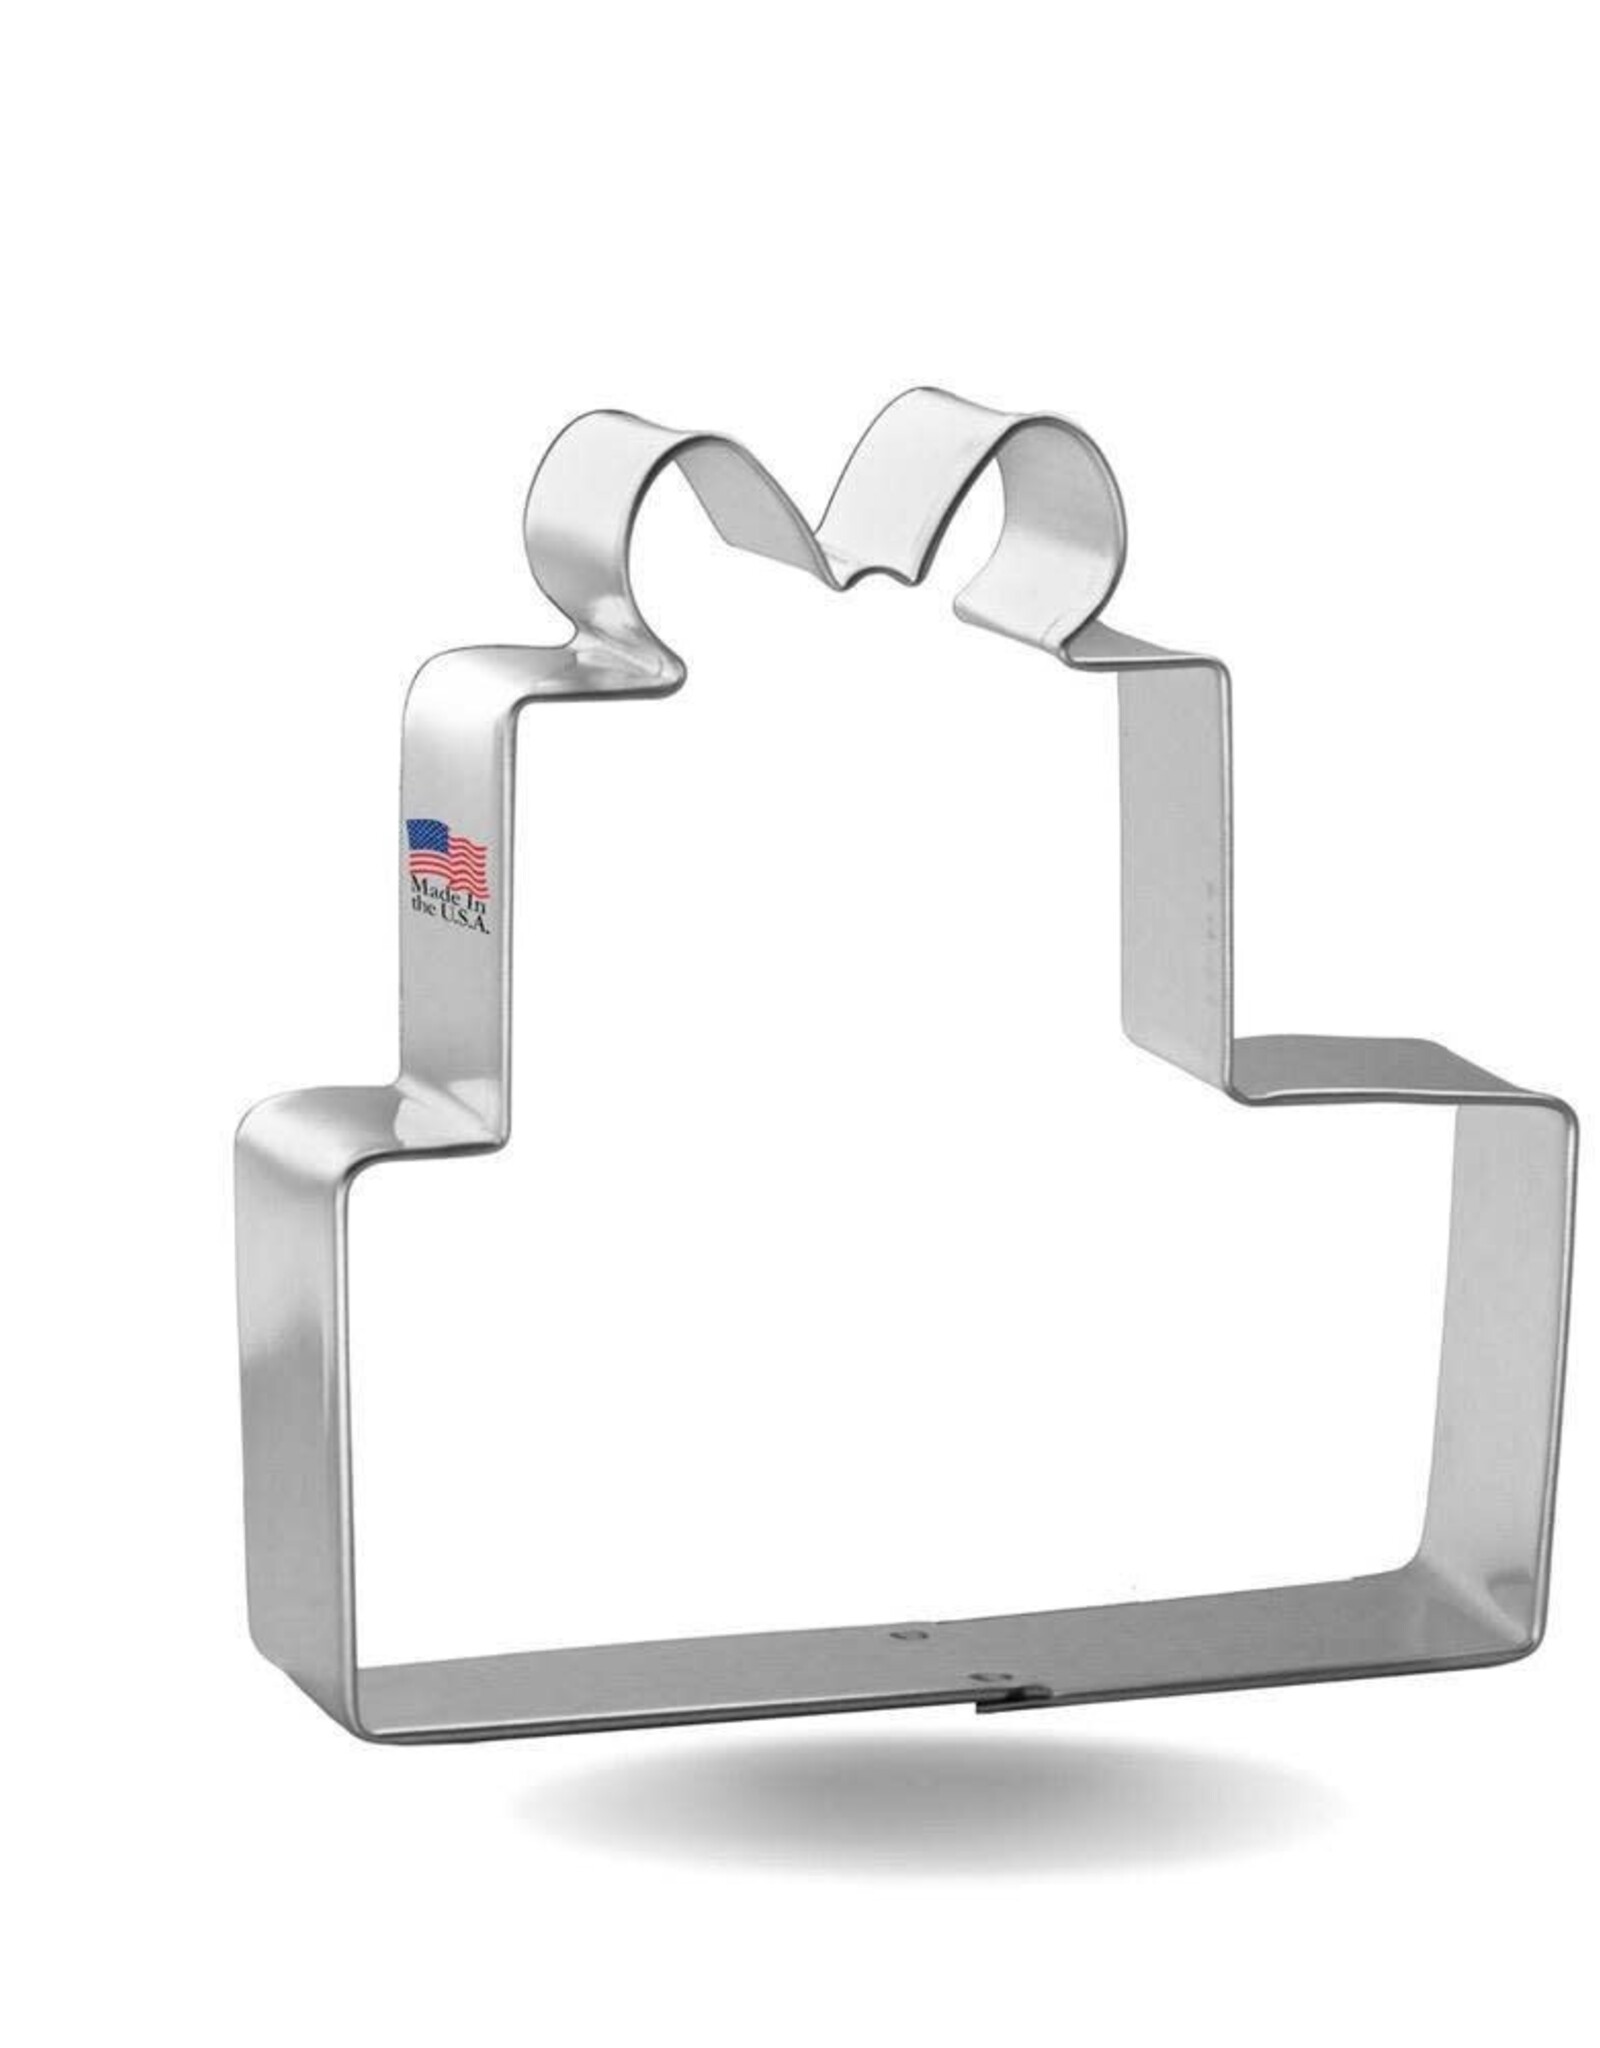 Stacked Gifts Cookie Cutter 3.75